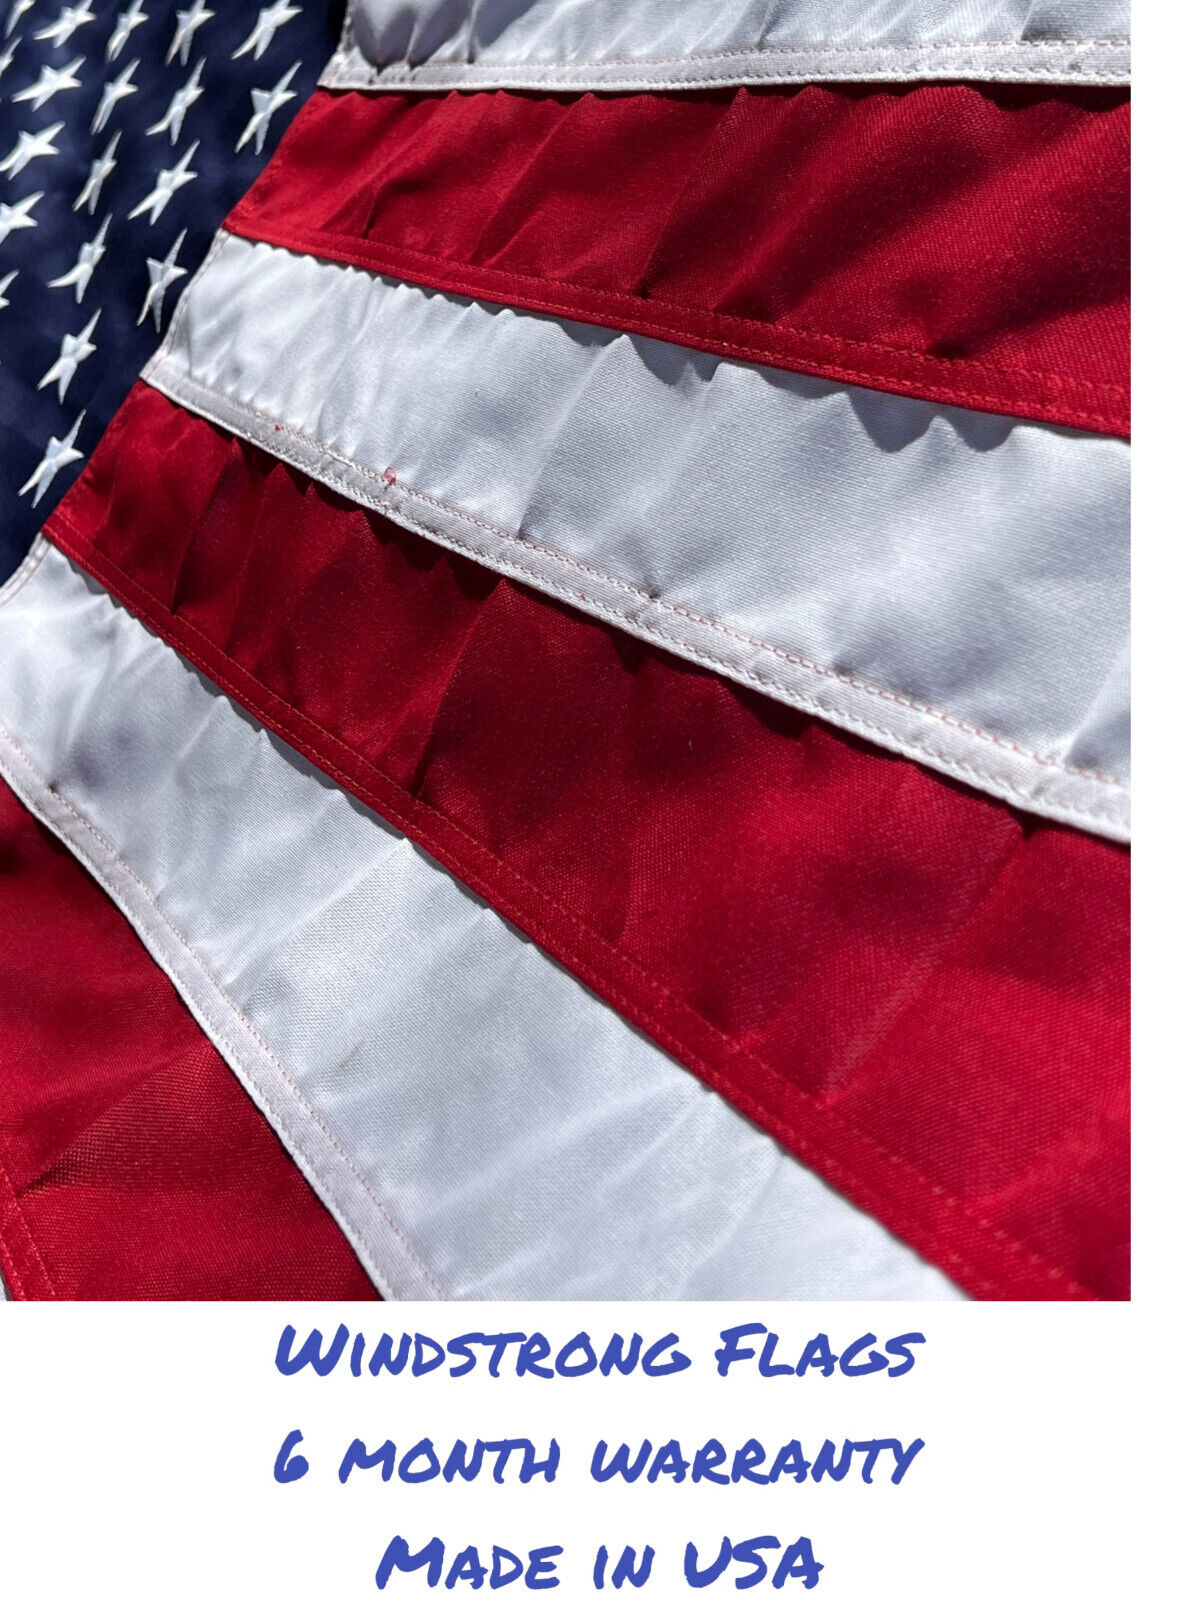 3x5 FT Deluxe Hand Sewn Windstrong US American Flag Commercial Polyester US Made